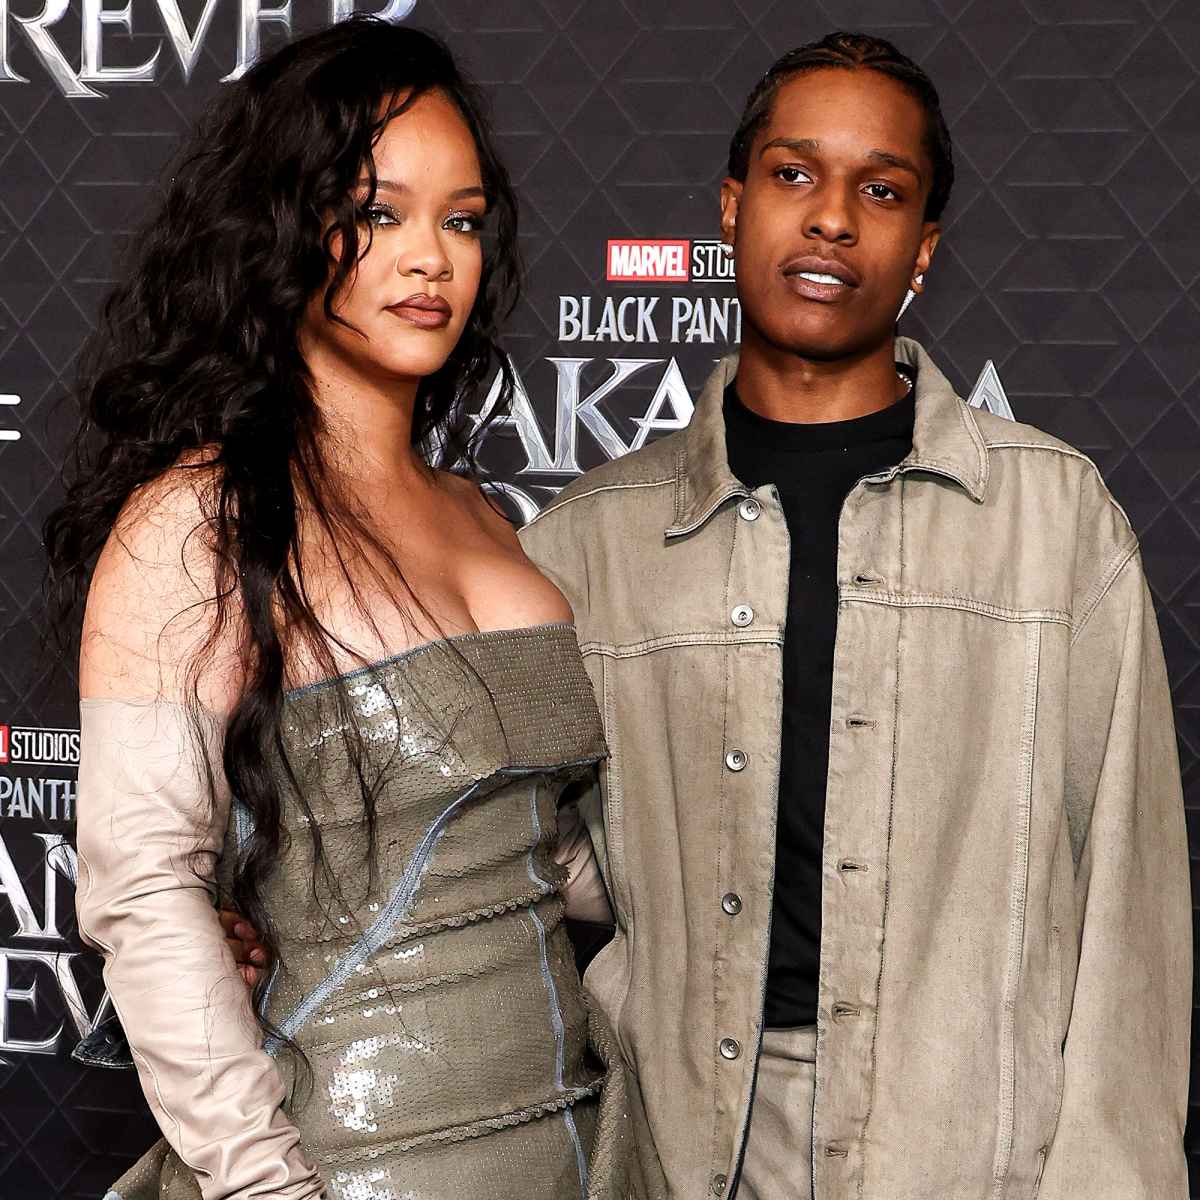 Rihanna Says Boyfriend ASAP Rocky Became Her “Family” During the Pandemic